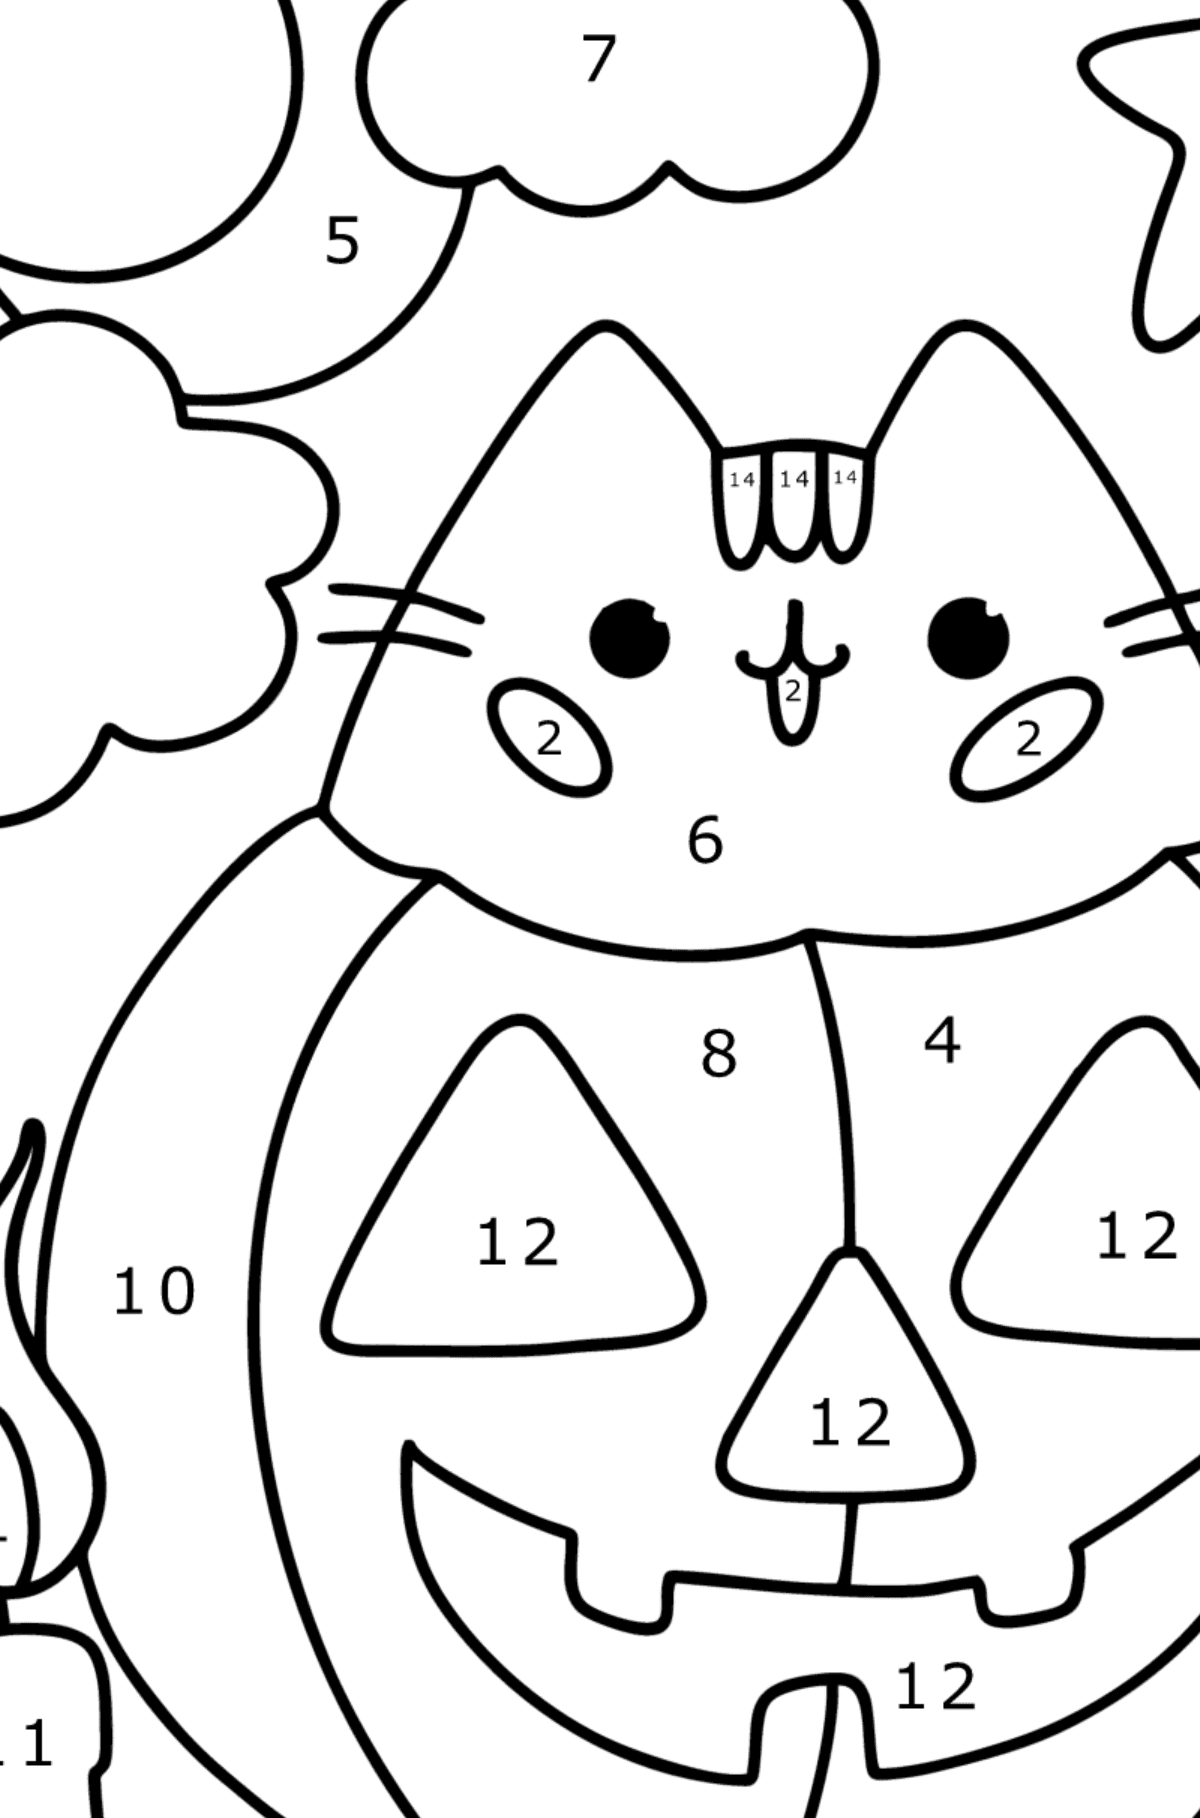 Pusheen and halloween сoloring page - Coloring by Numbers for Kids